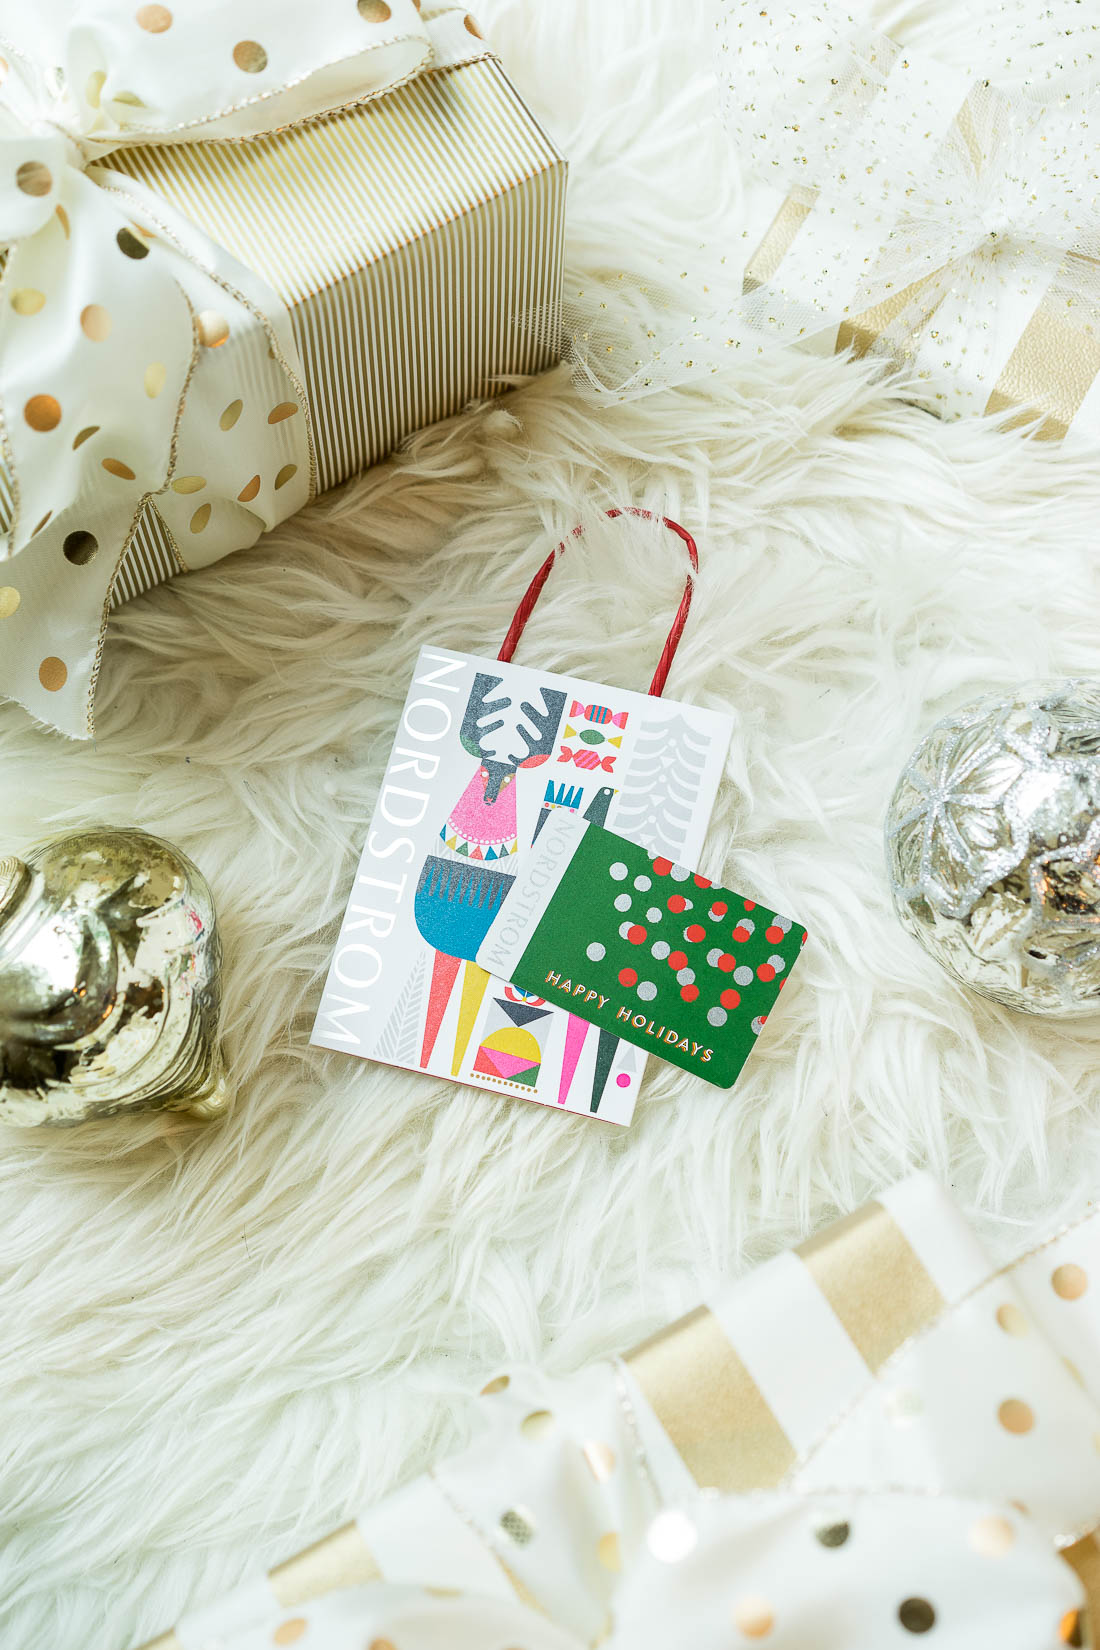 A Glam Lifestyle blogger rounds up the top 5 online gift card retailers to shop for last minute Christmas gifts including a Nordstrom egift card